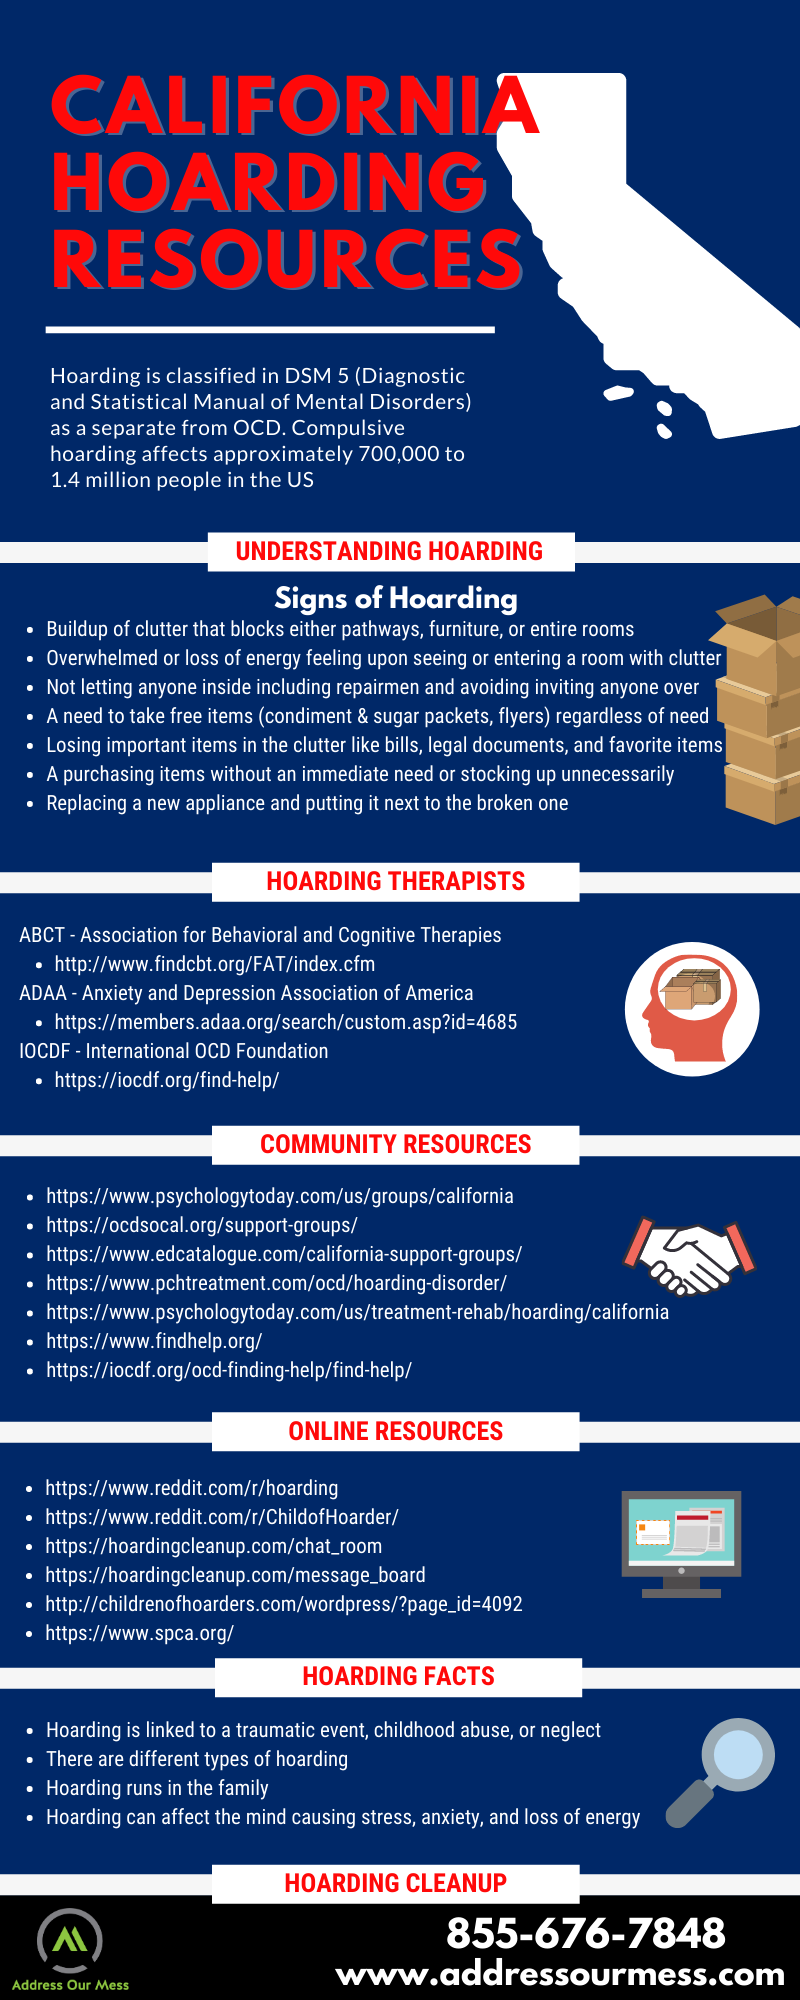 California Hoarding Resources Infographic